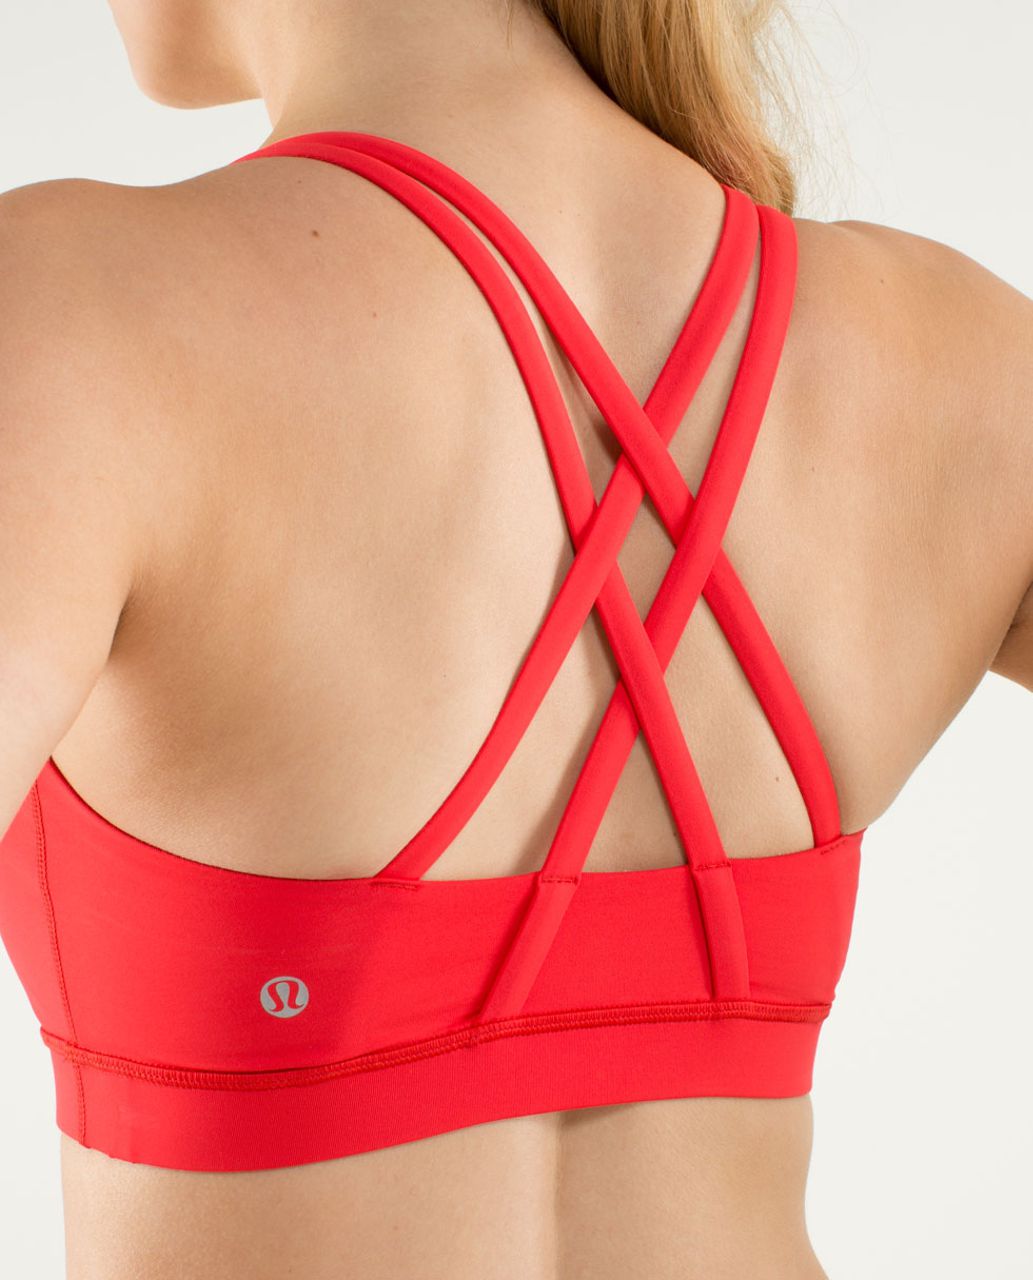 Lululemon Hotty Hot and Energy Bra in Carnation Red